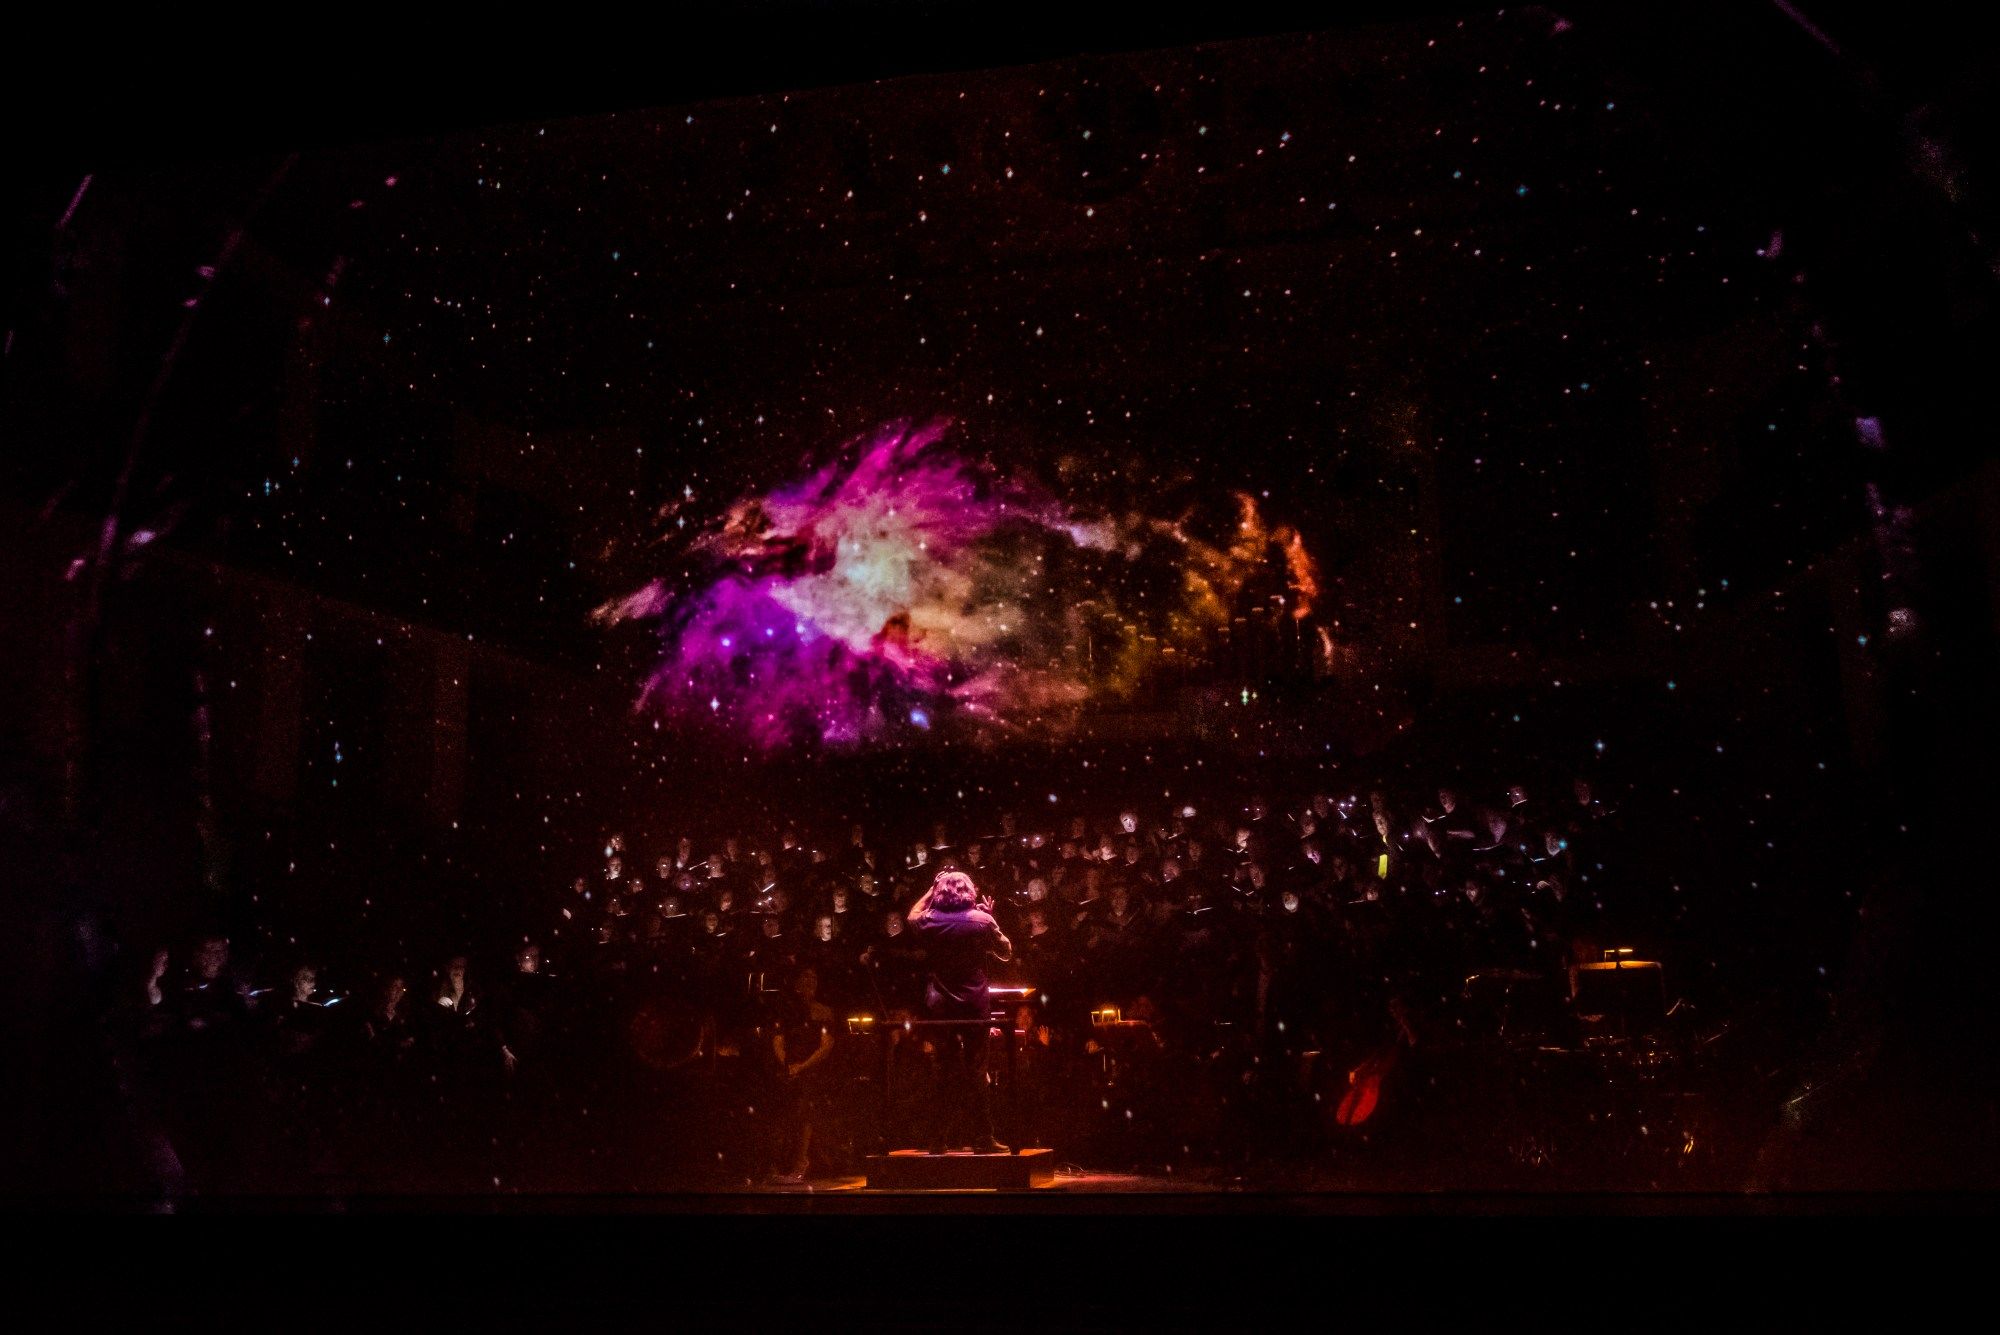 A conductor leads a choir on a darkened stage with a purple and orange cosmic nebula image hovering over the group and bathing then in its glow.